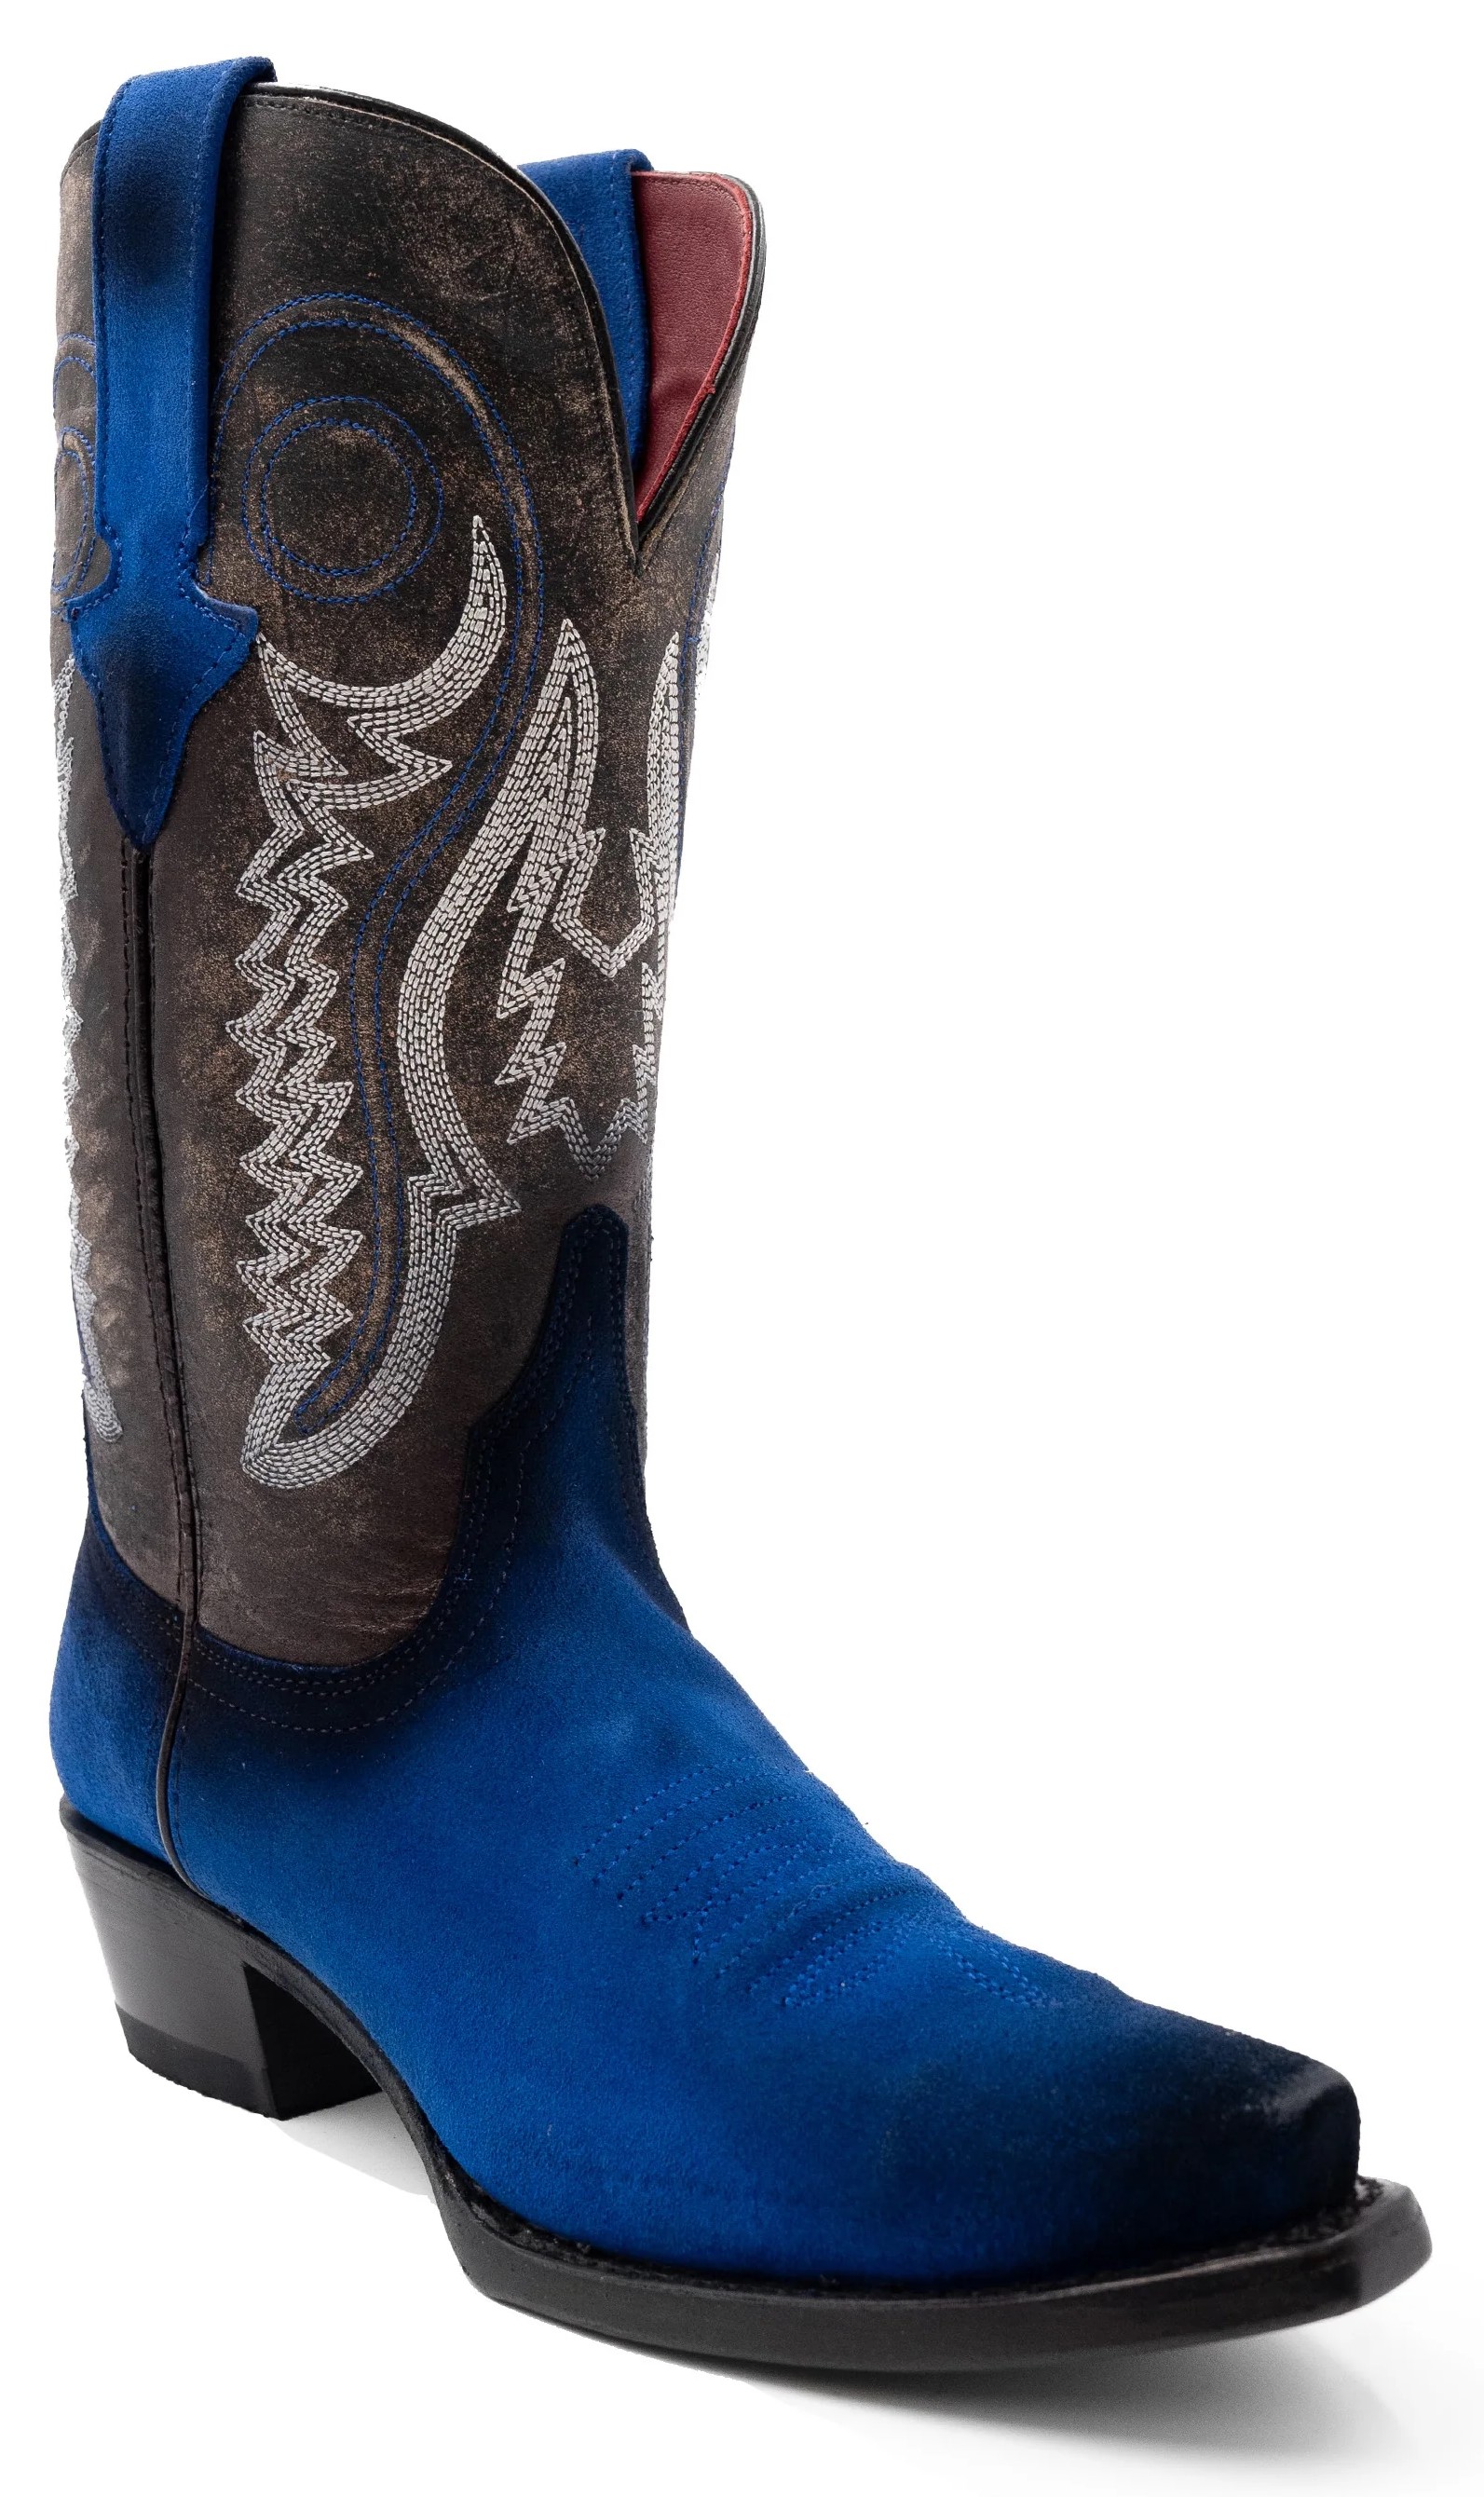 Ferrini Ladies "Roughrider" Electric Blue Full Grain Leather Snipped Toe Cowgirl Boots 84361-17